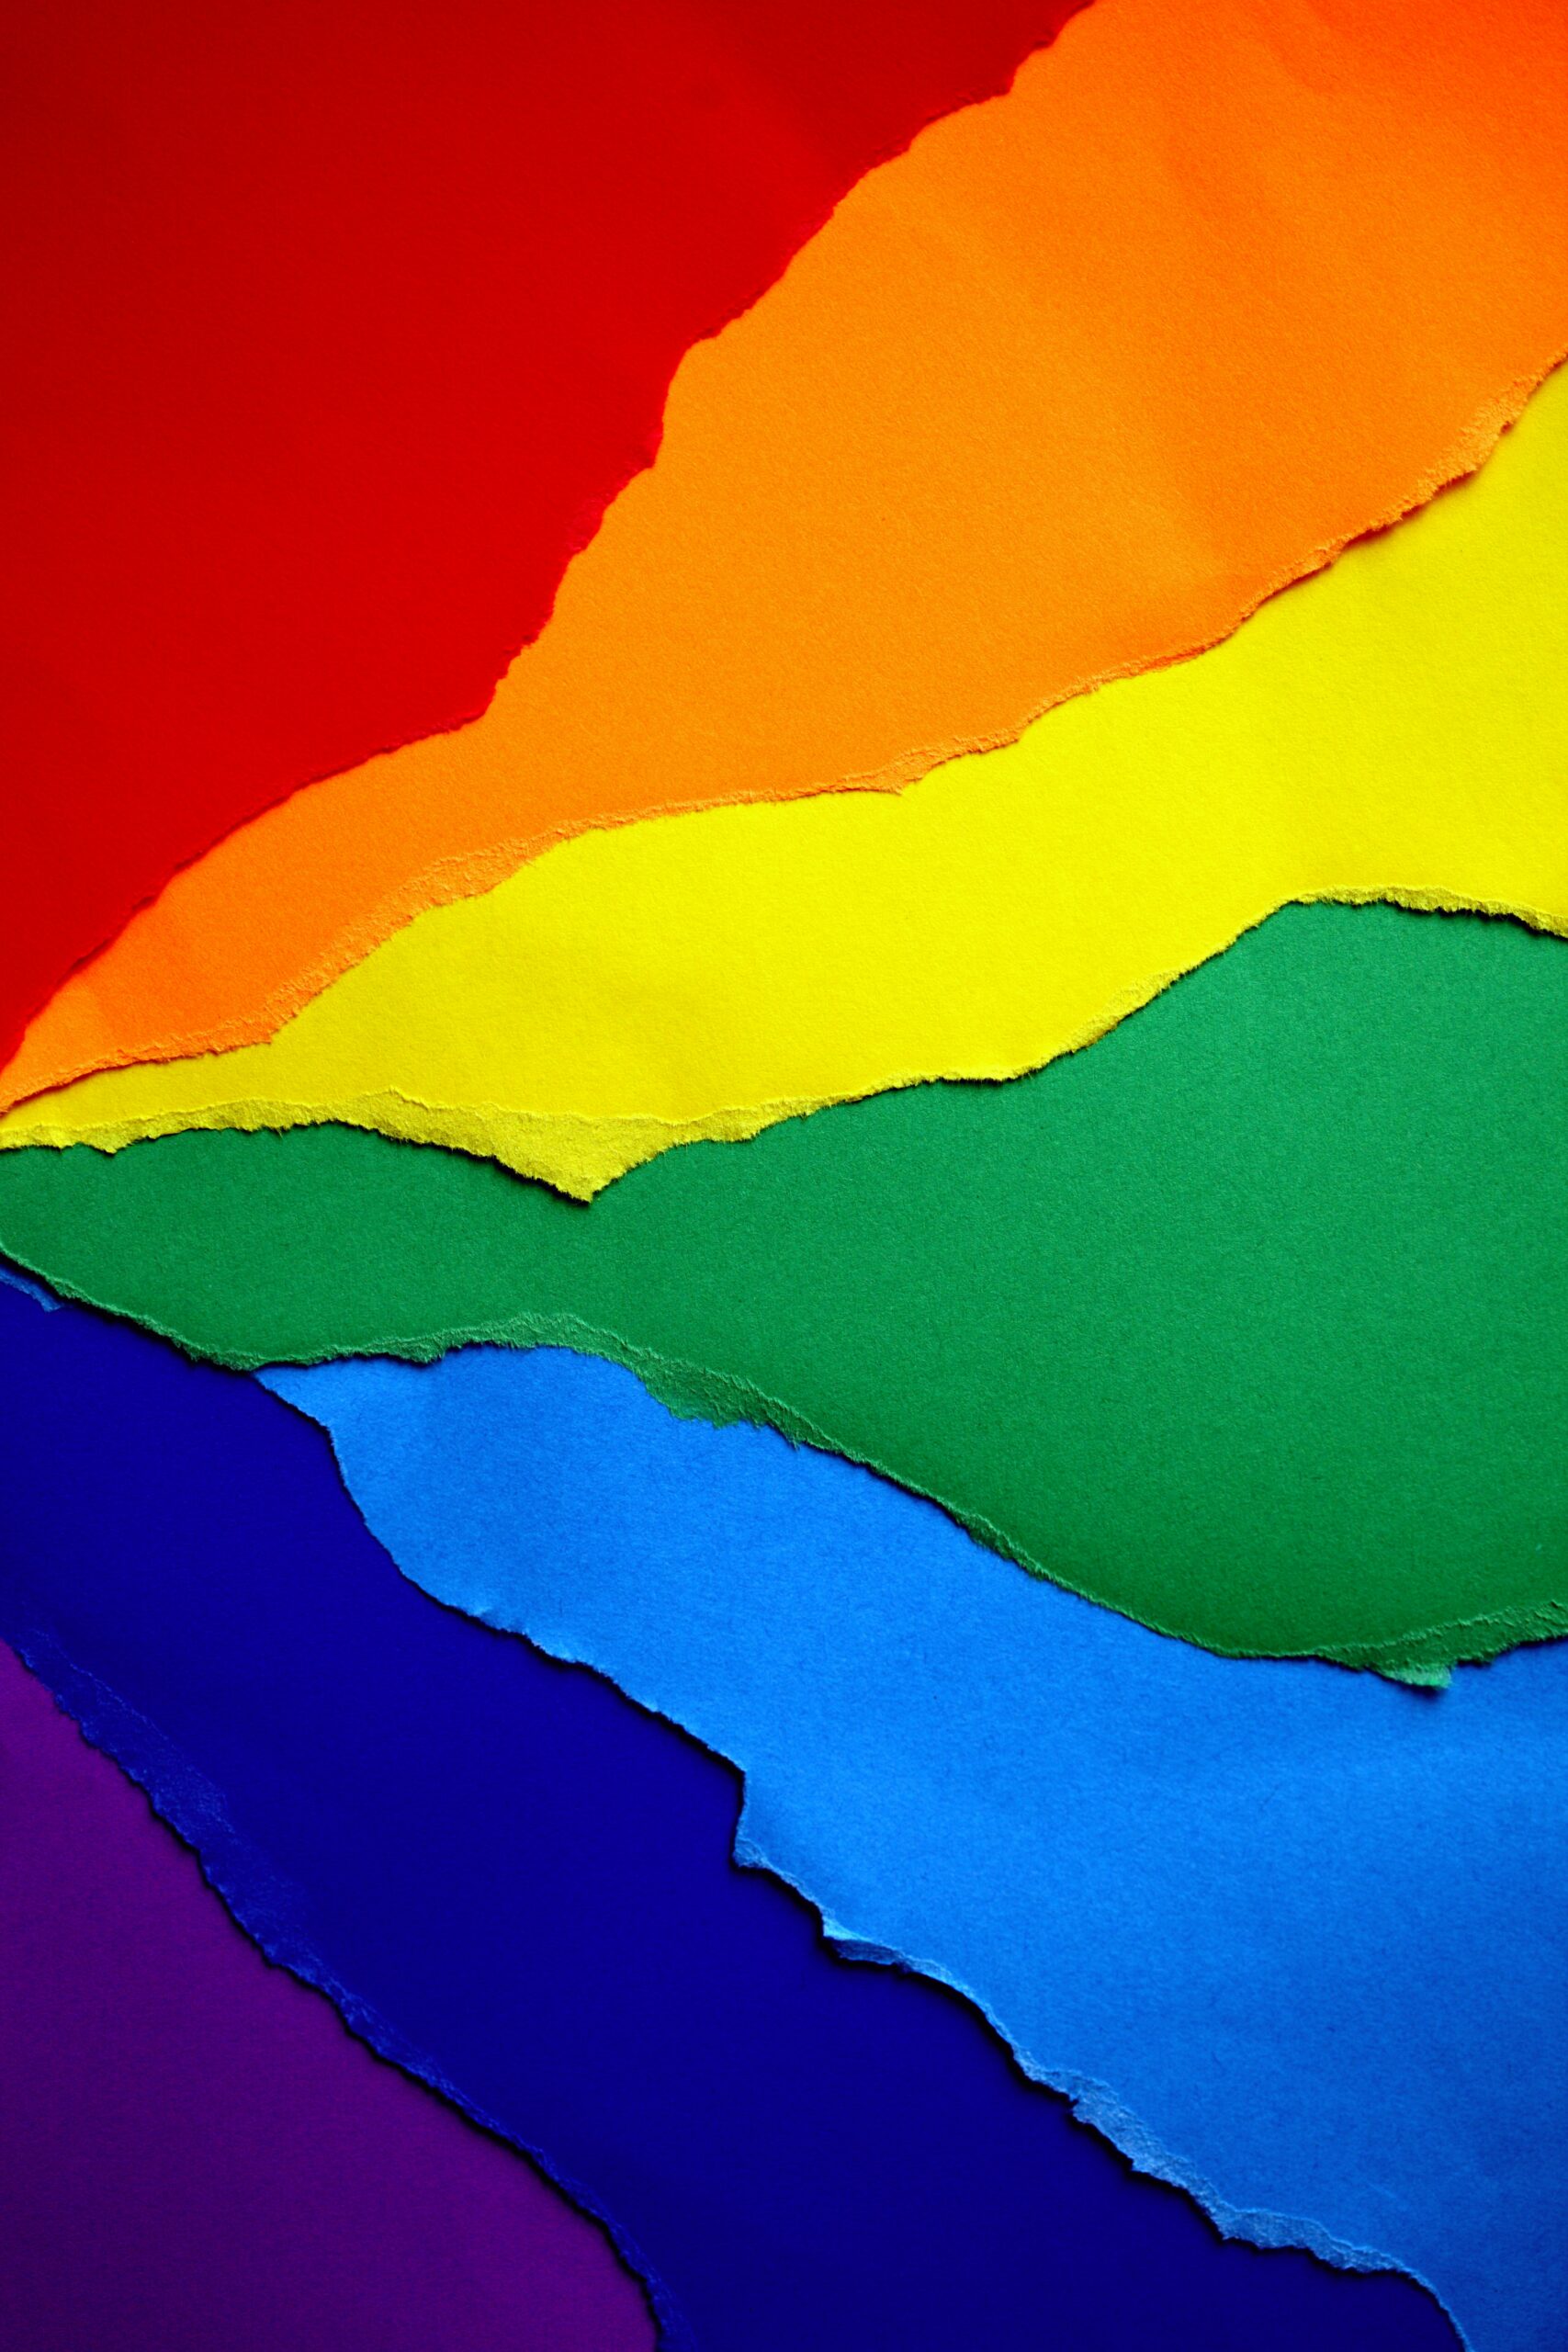 Queering the Creative Writing Classroom